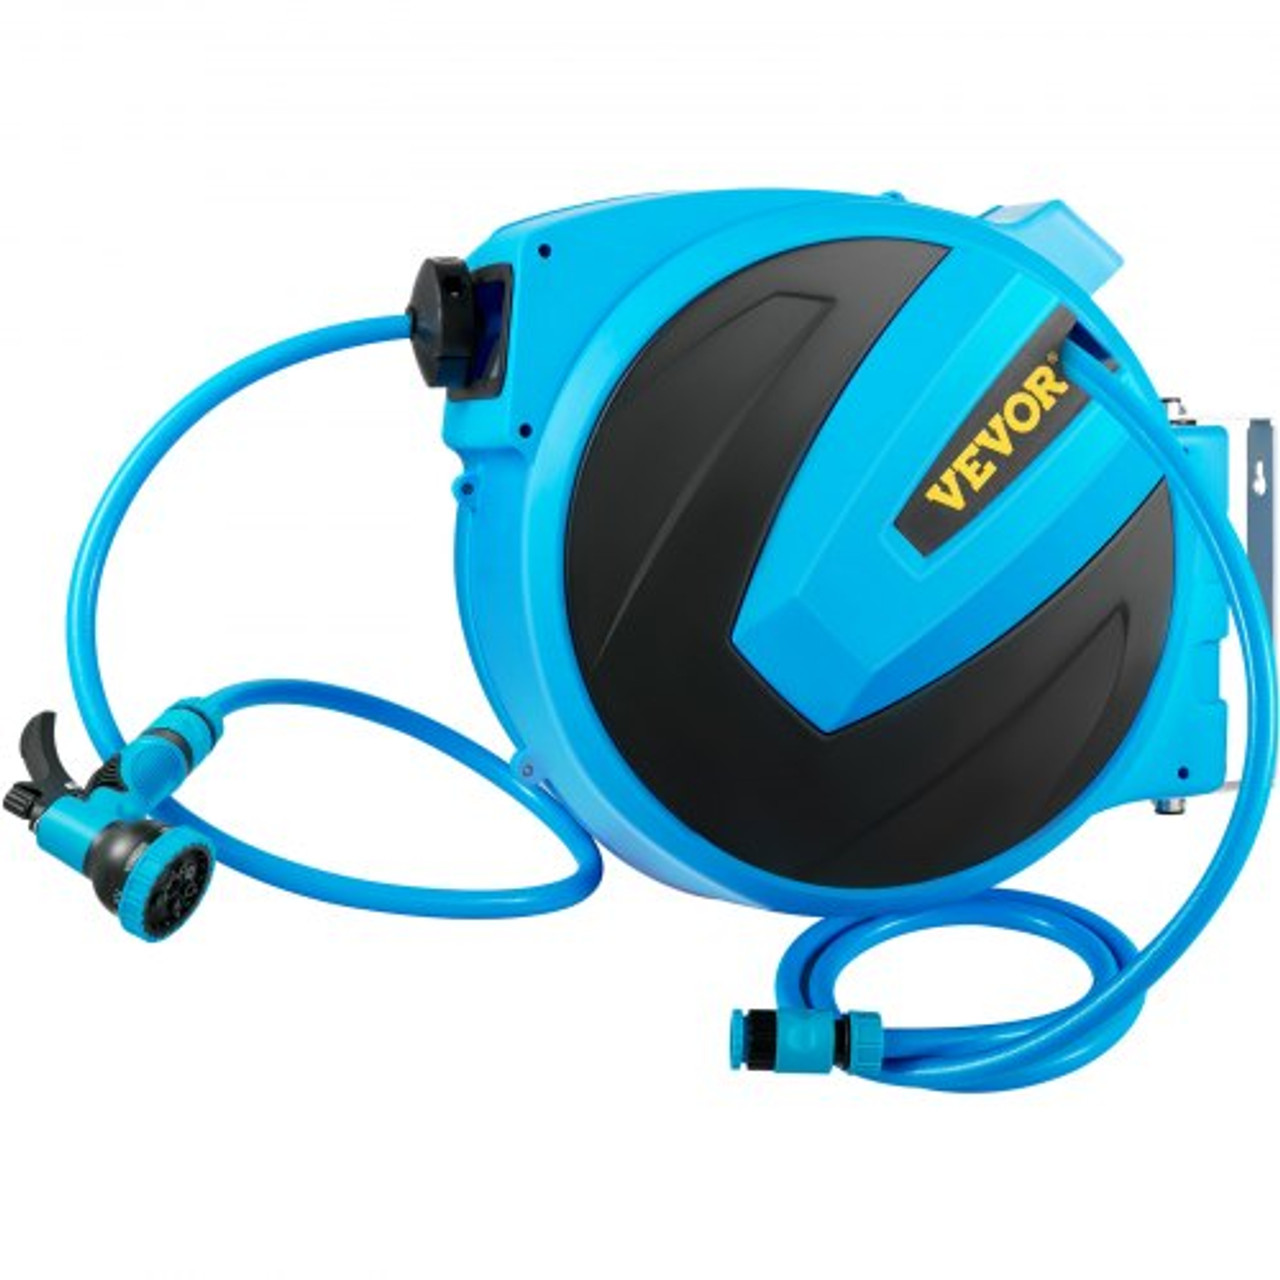 Retractable Hose Reel, 1/2 inch x 85 ft, Any Length Lock